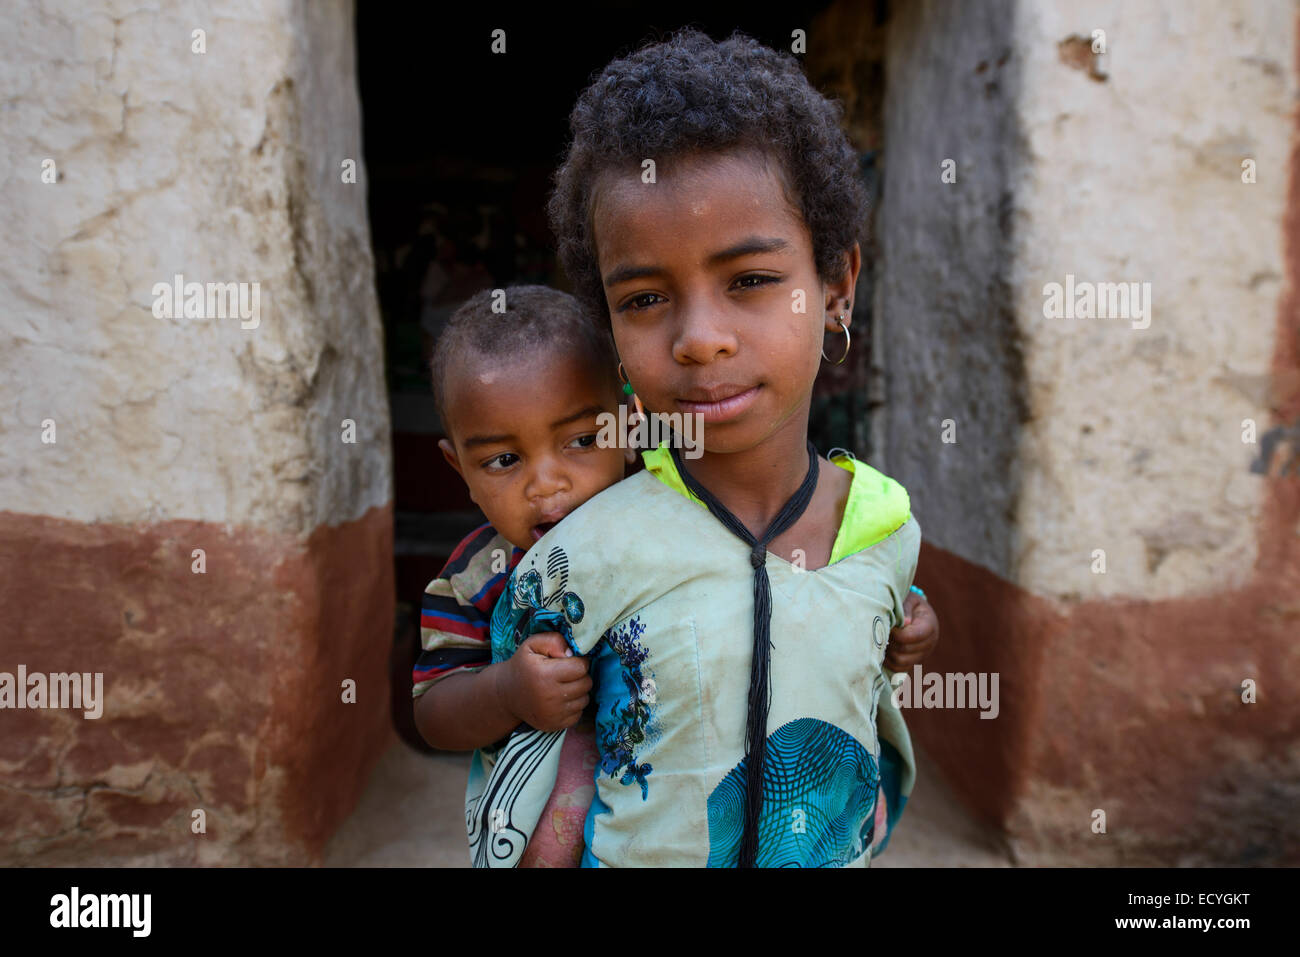 Portrait Ethiopian Boy Tigray Ethiopia High Resolution Stock Photography And Images Alamy